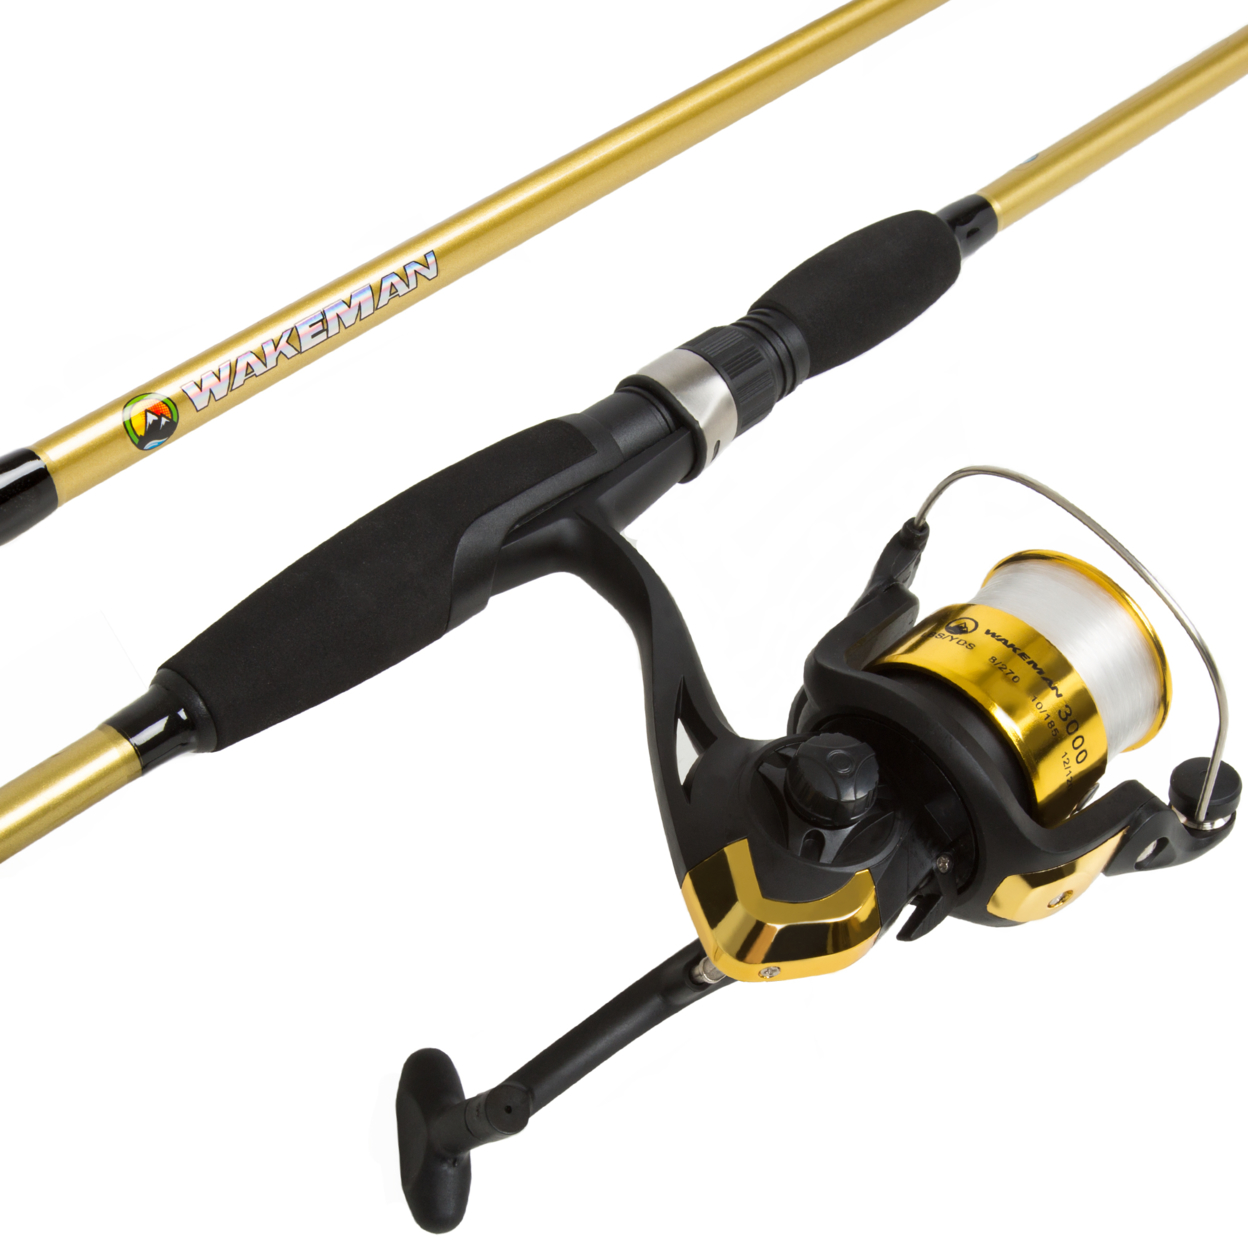 Wakeman Strike Series Spinning Rod And Reel Combo - Trophy Gold